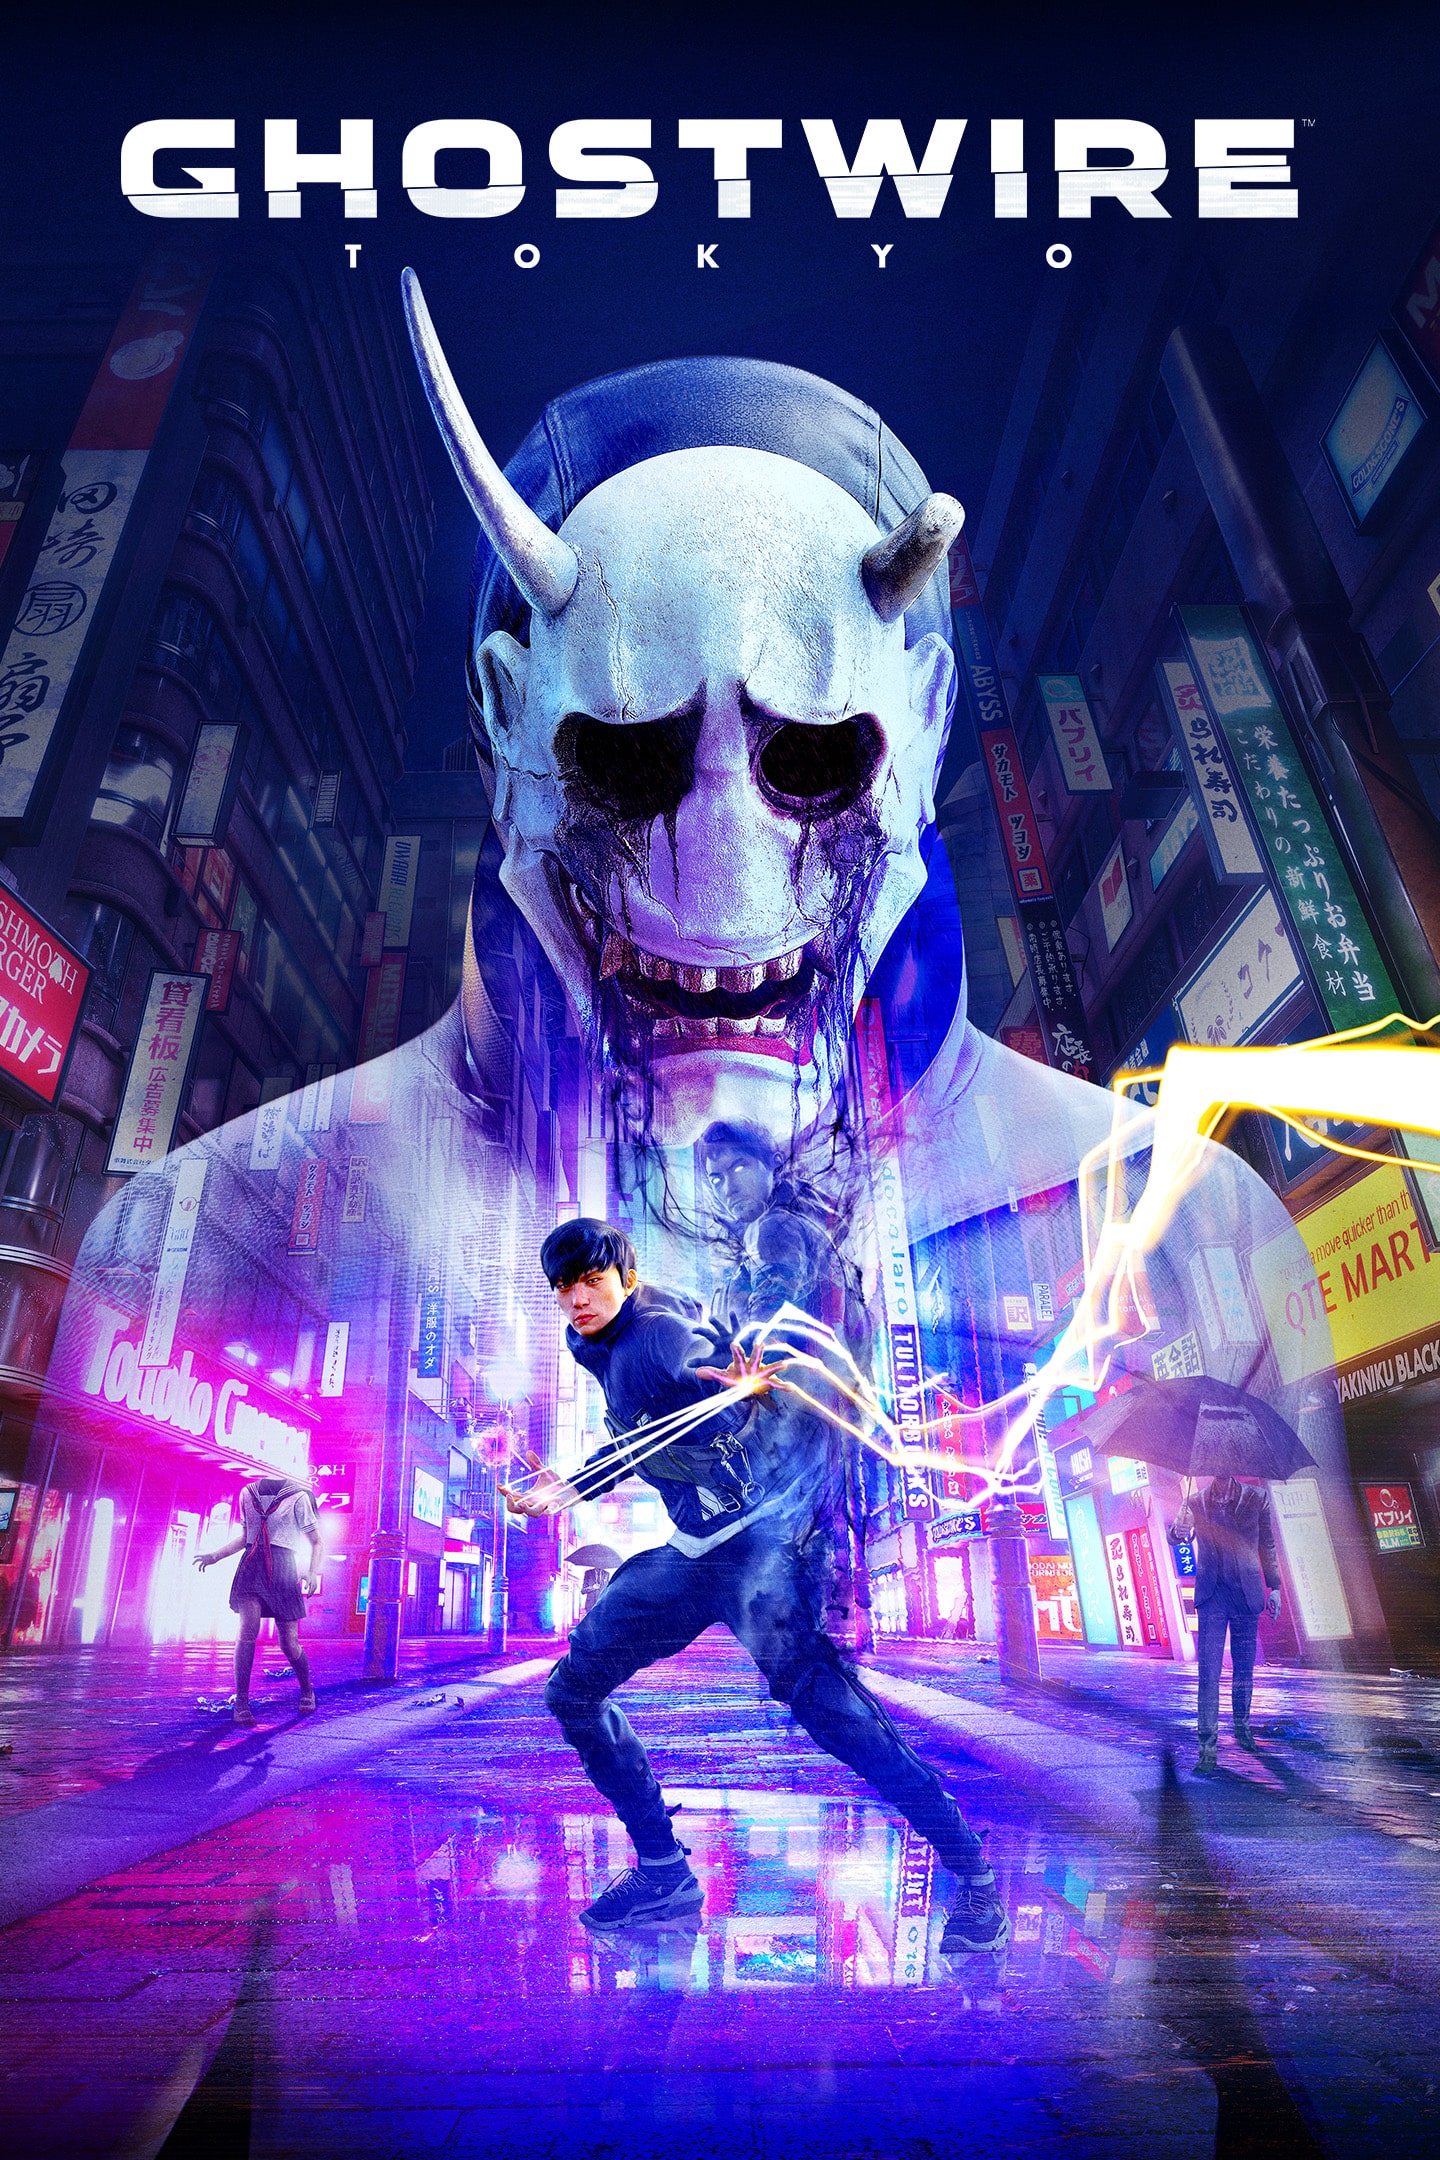 Ghostwire: Tokyo Deluxe Edition - PS5 - Compra jogos online na